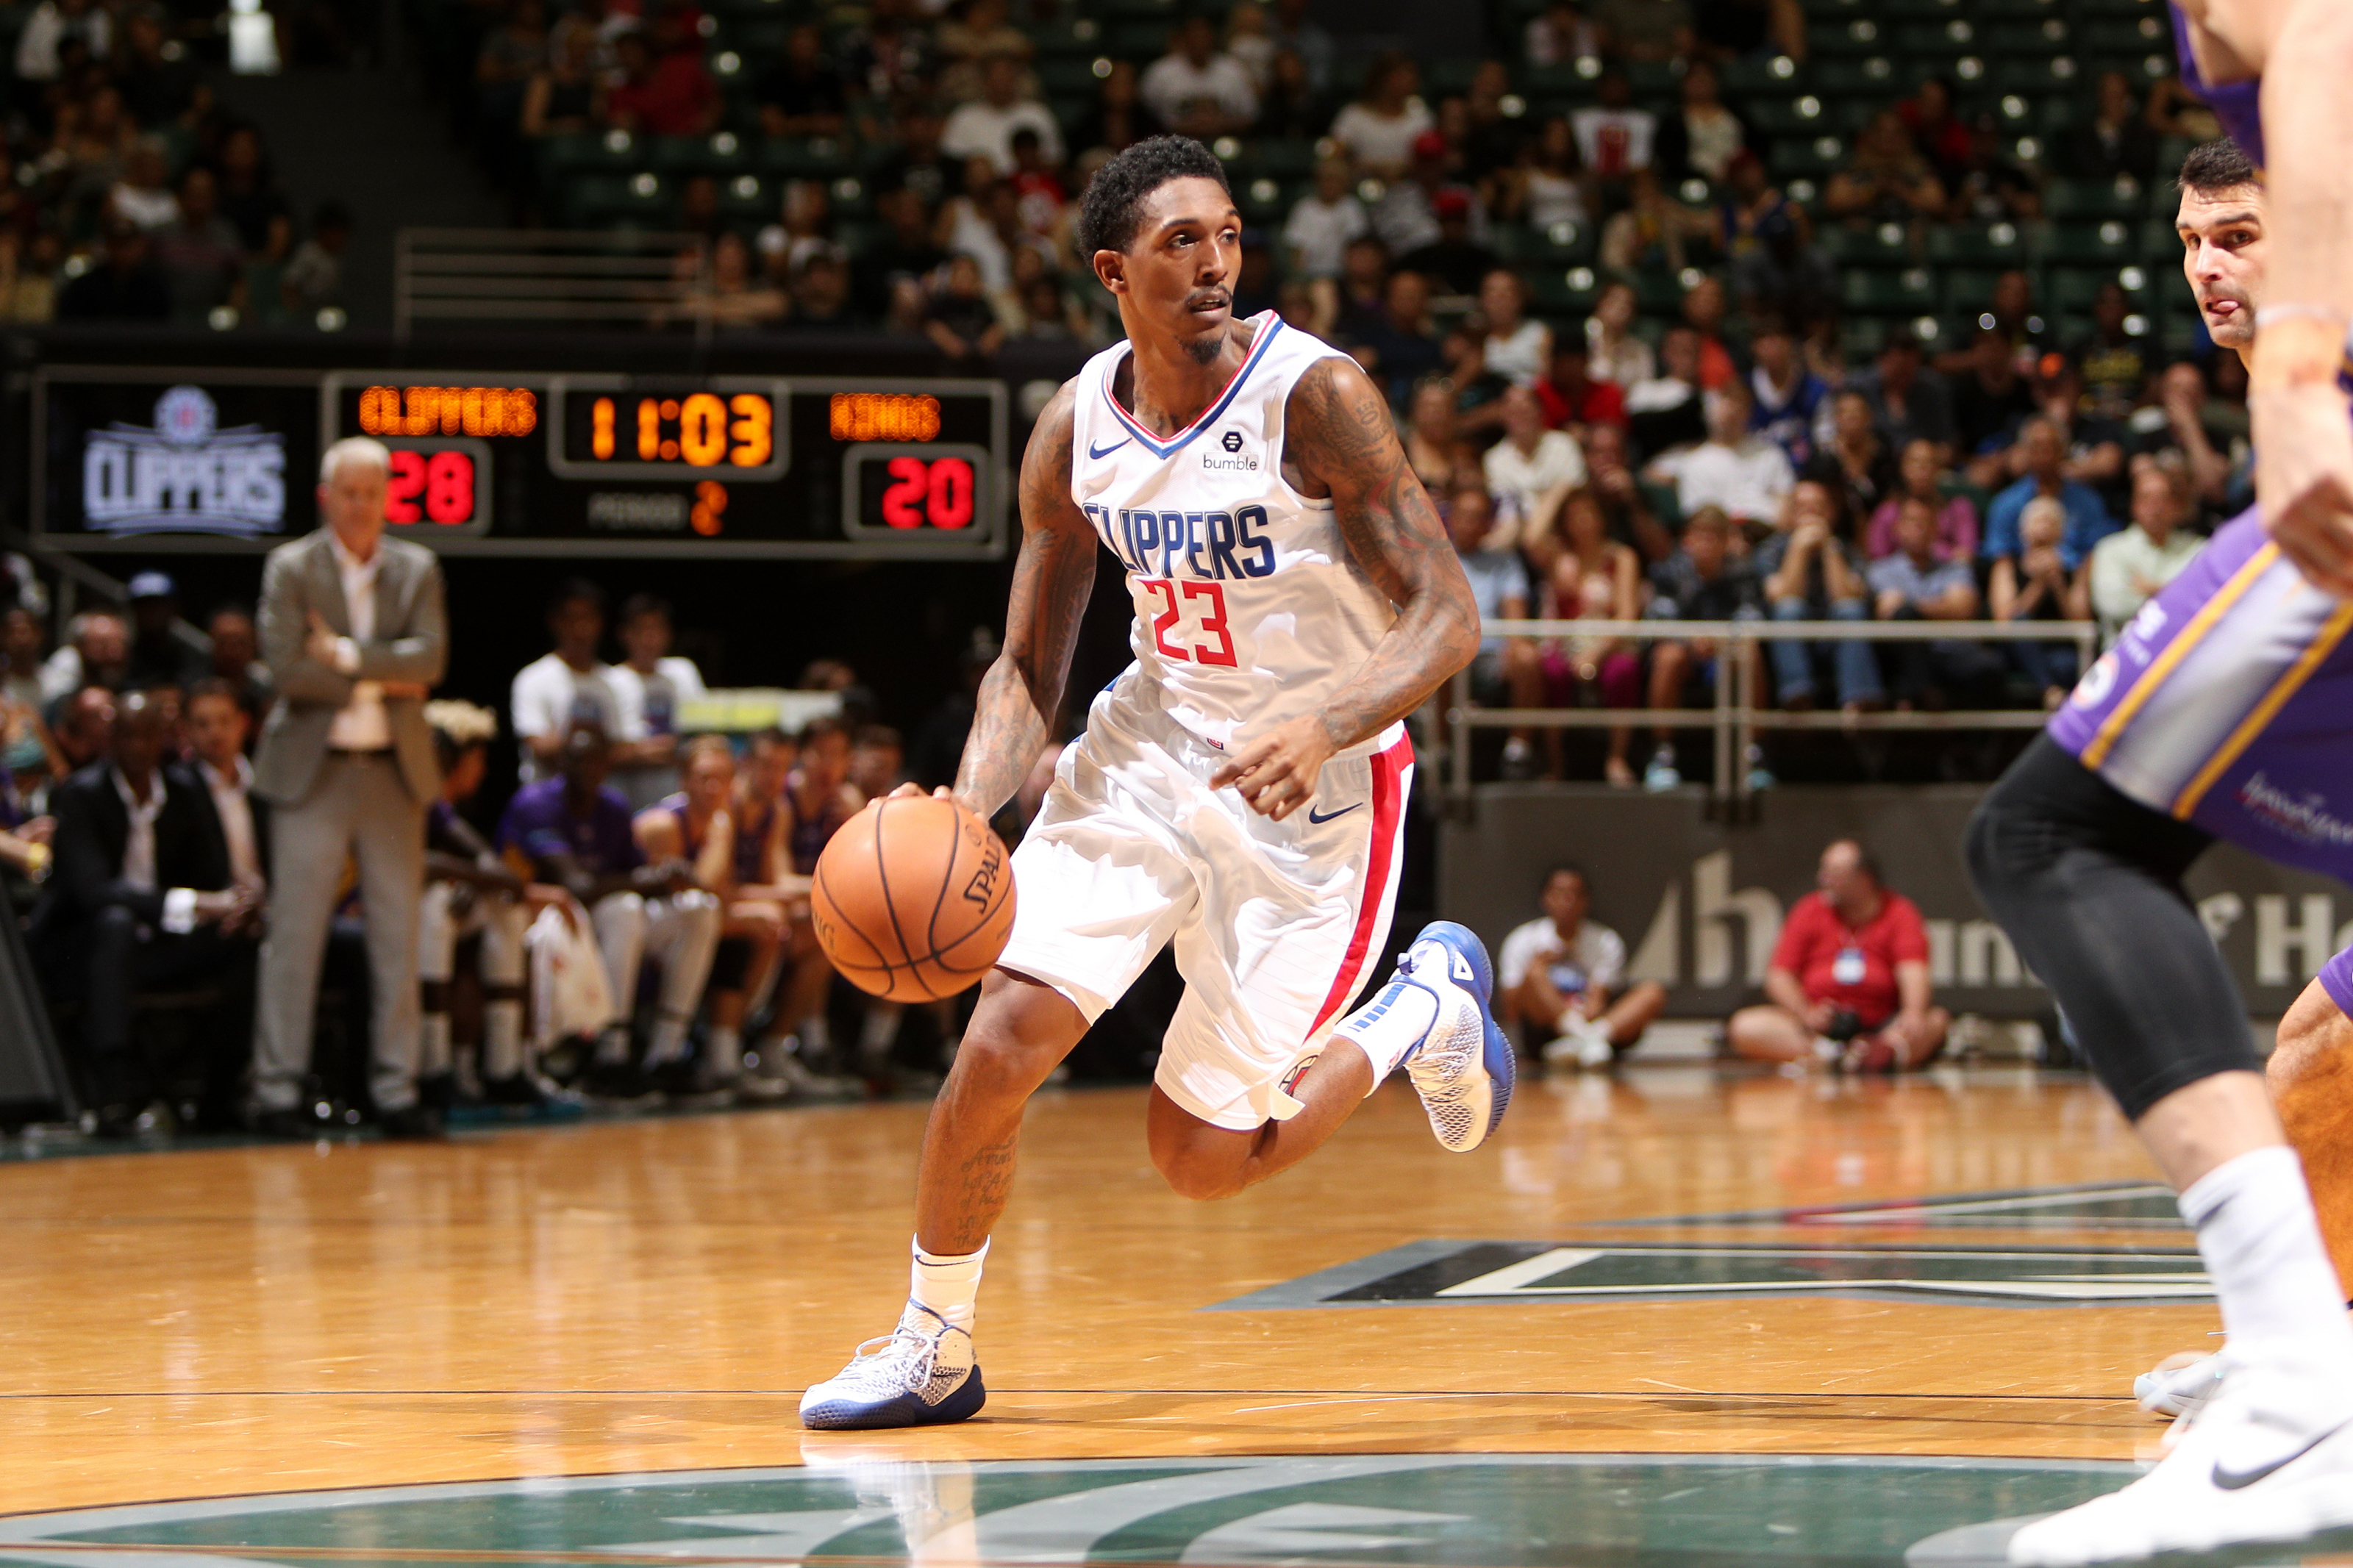 LA Clippers' Lou Williams Having an Historic Season off the Bench